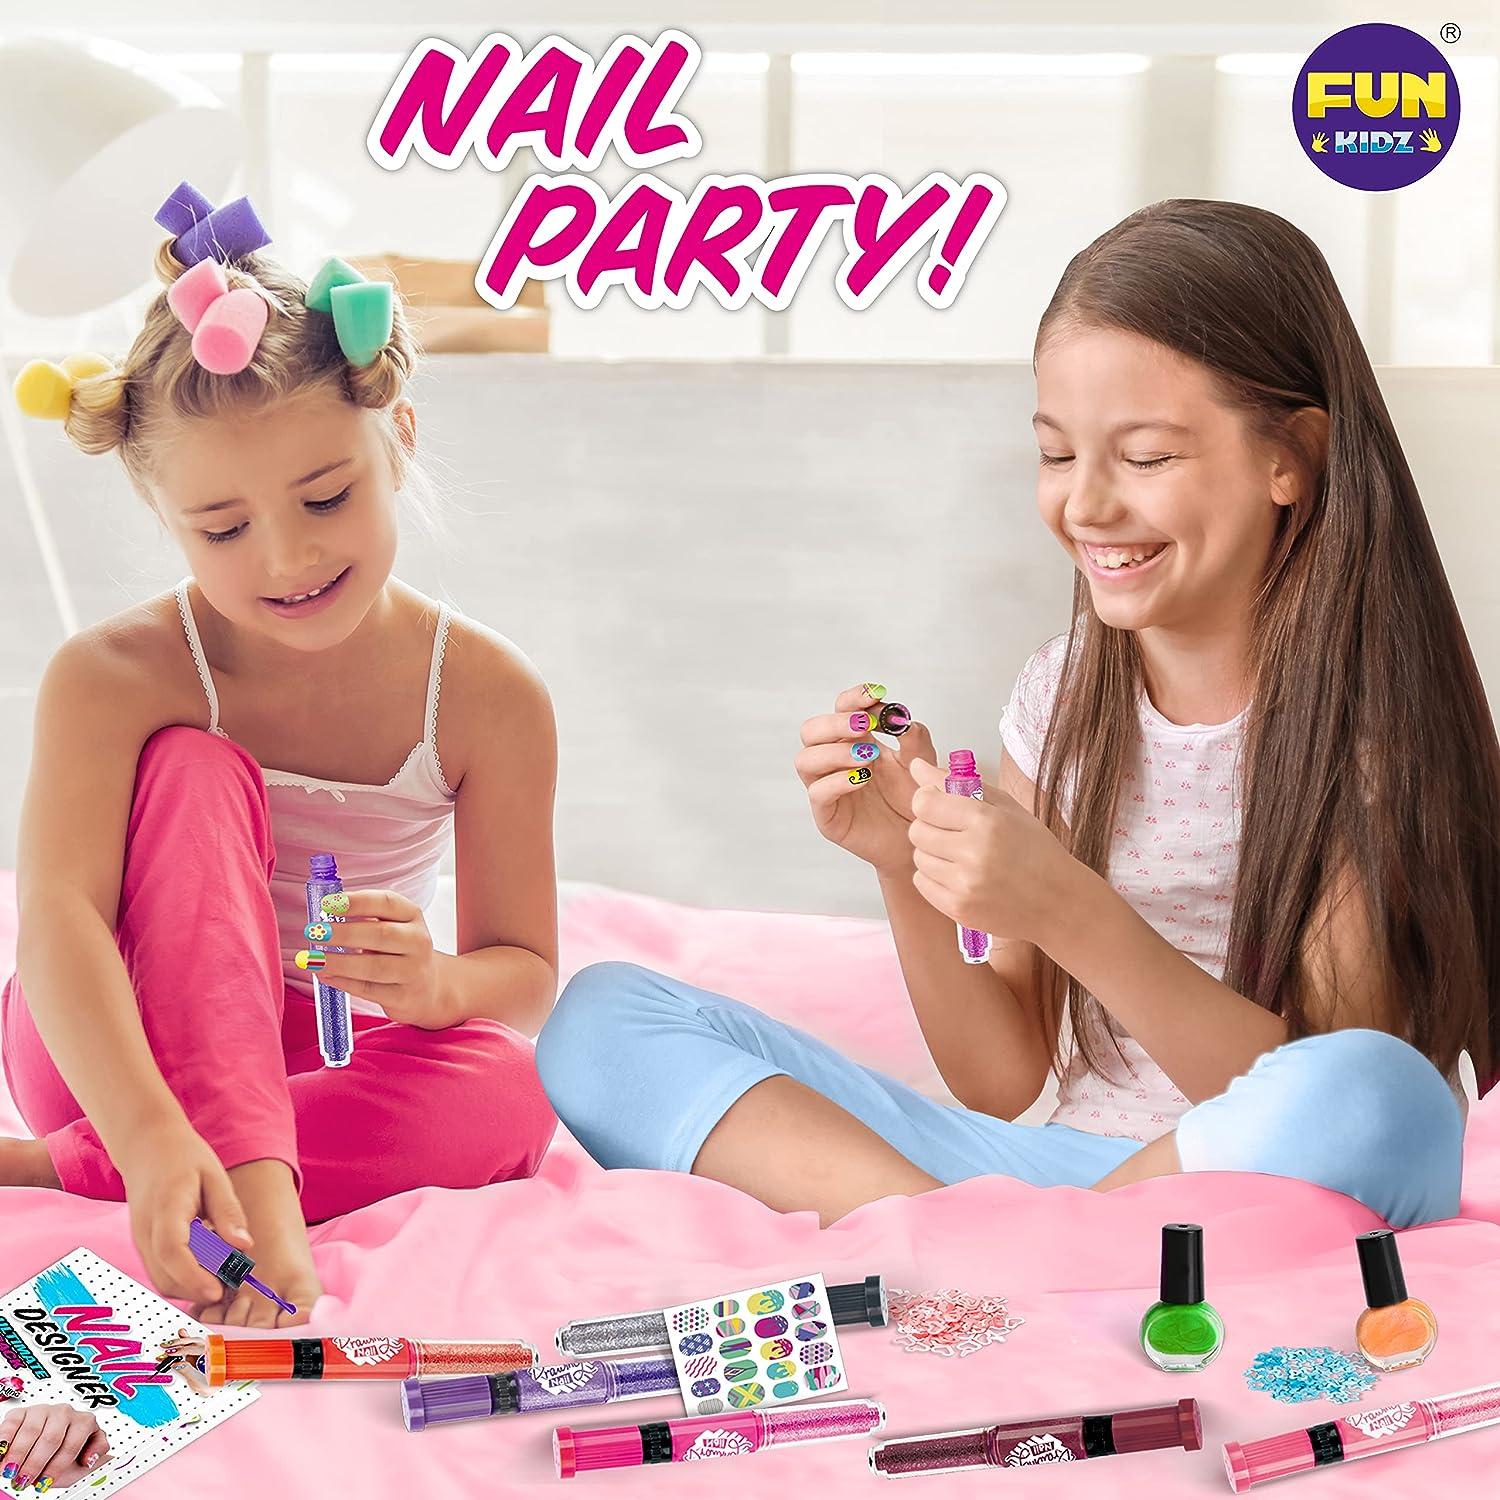 Nail Kit for Girls Ages 7-12, FunKidz Peelable Nail Art Set with Nail  Polish Pens Glitter Sticky Temporary Nail Decoration Makeup Kit for Teens  Party